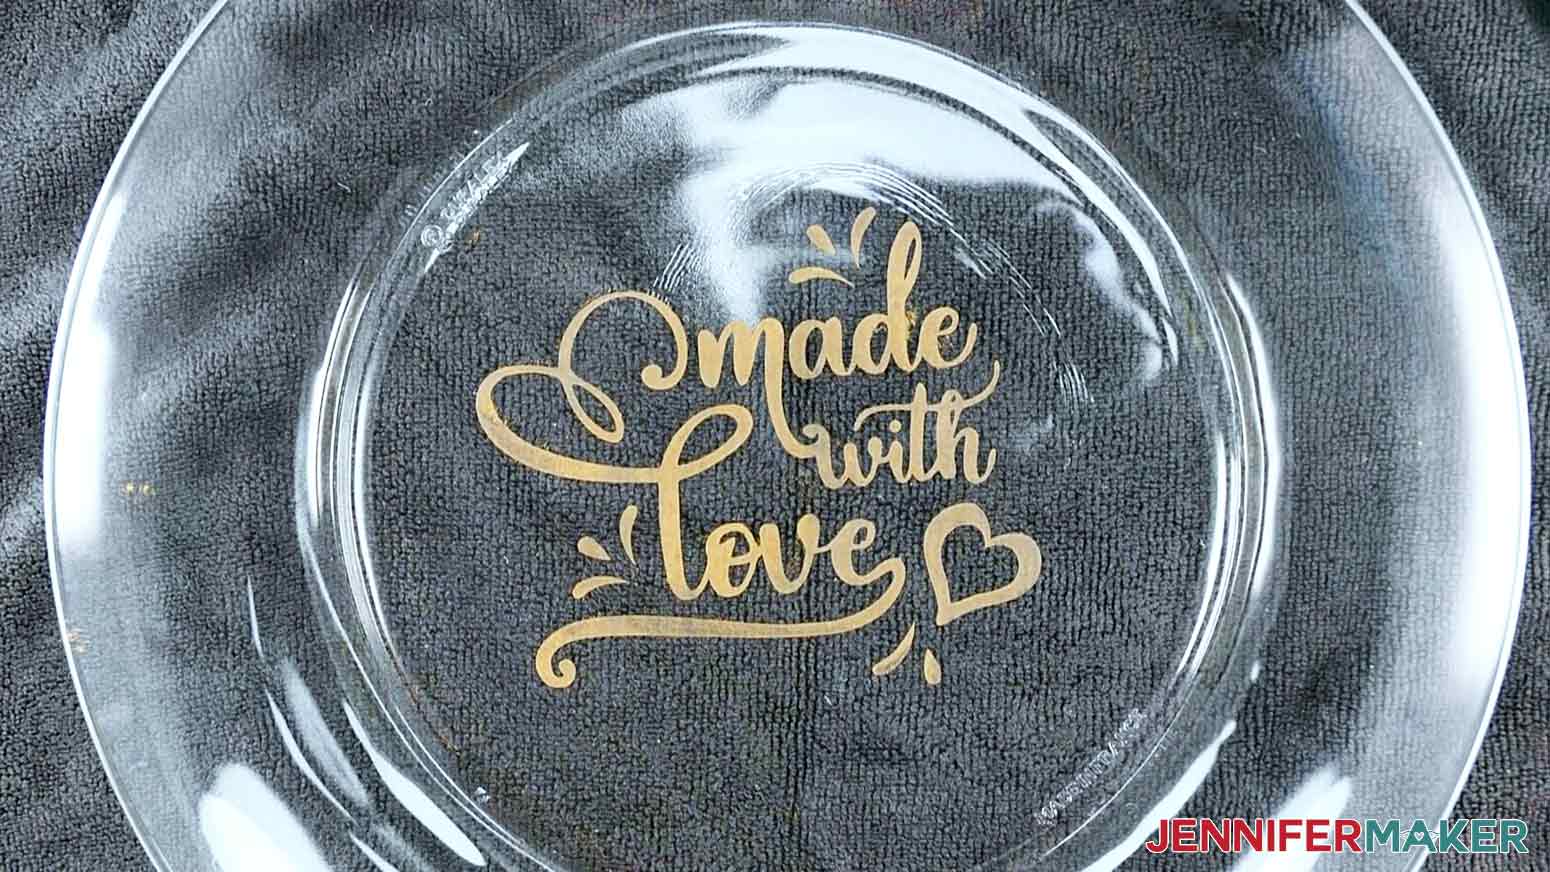 An overhead photo showing a finished color glass etching plate project with an etched design that says "made with love" painted in gold